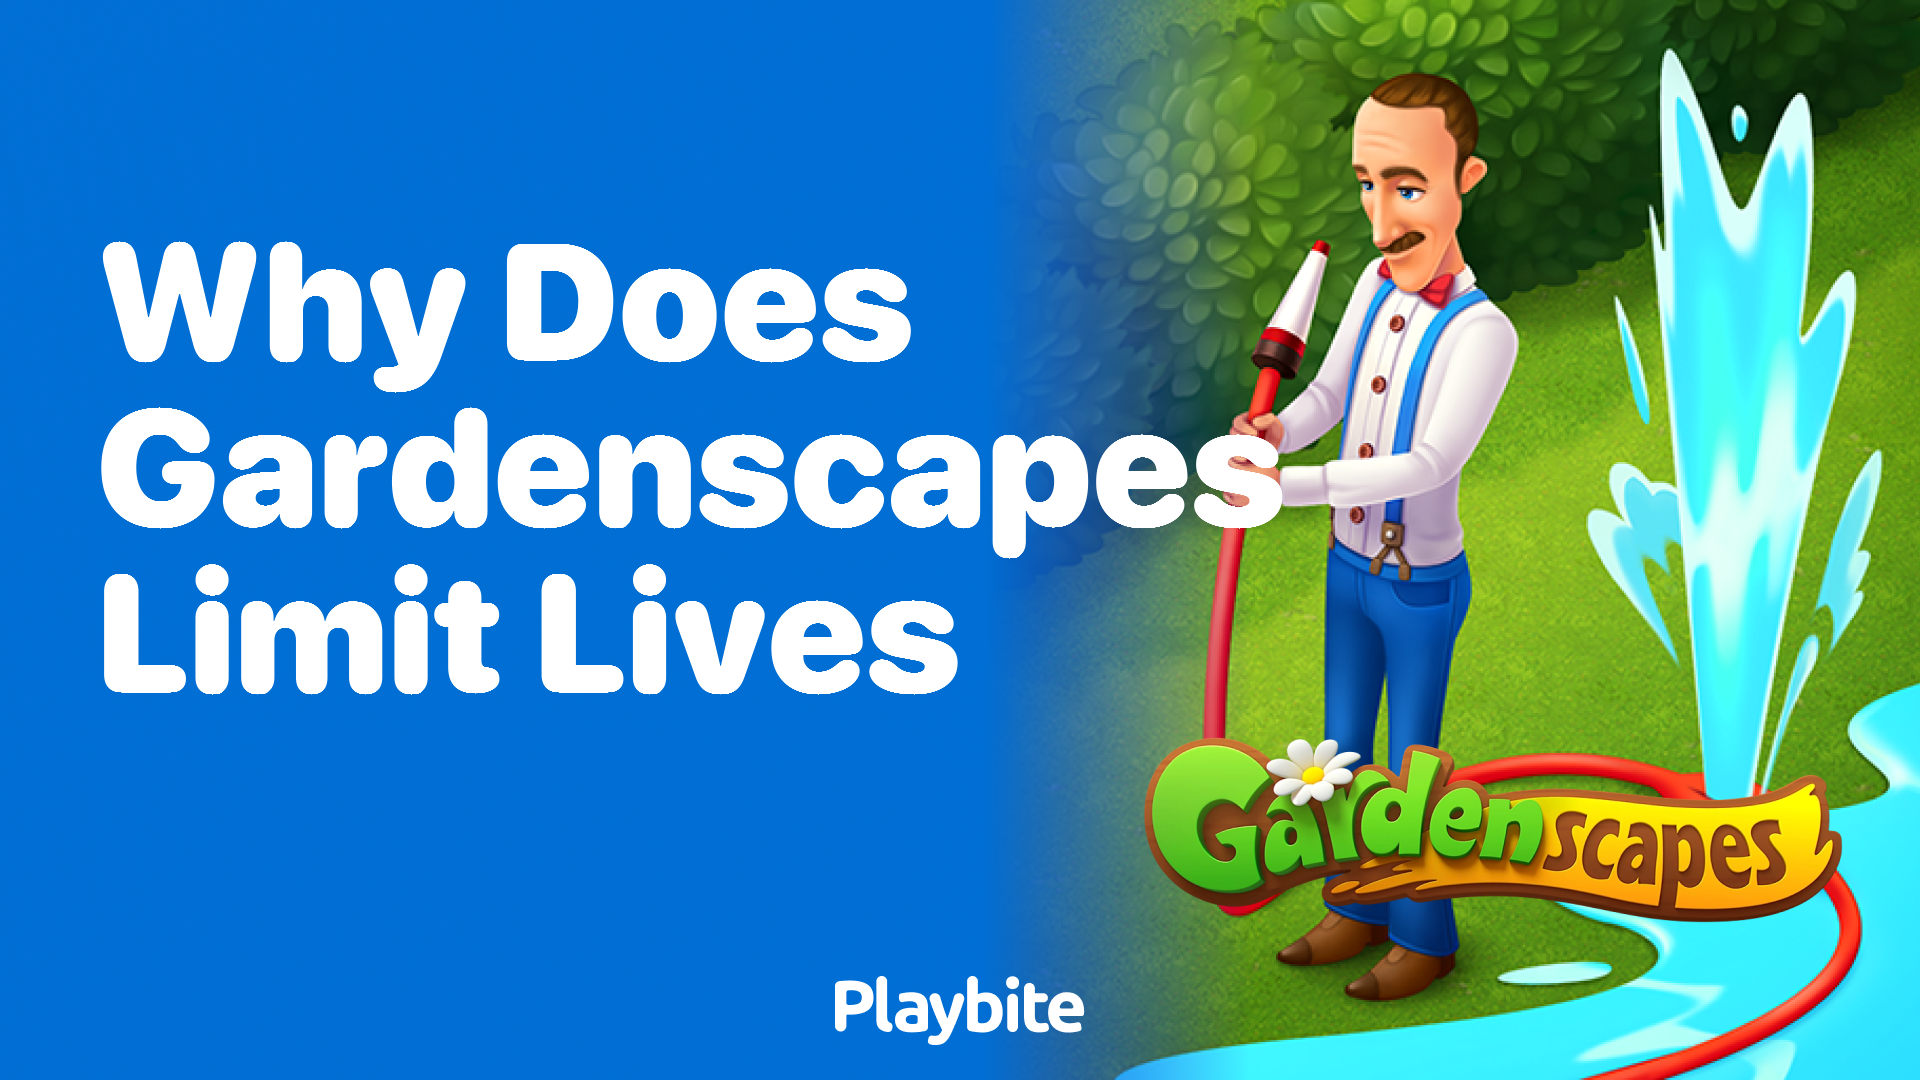 Why Does Gardenscapes Limit Lives?